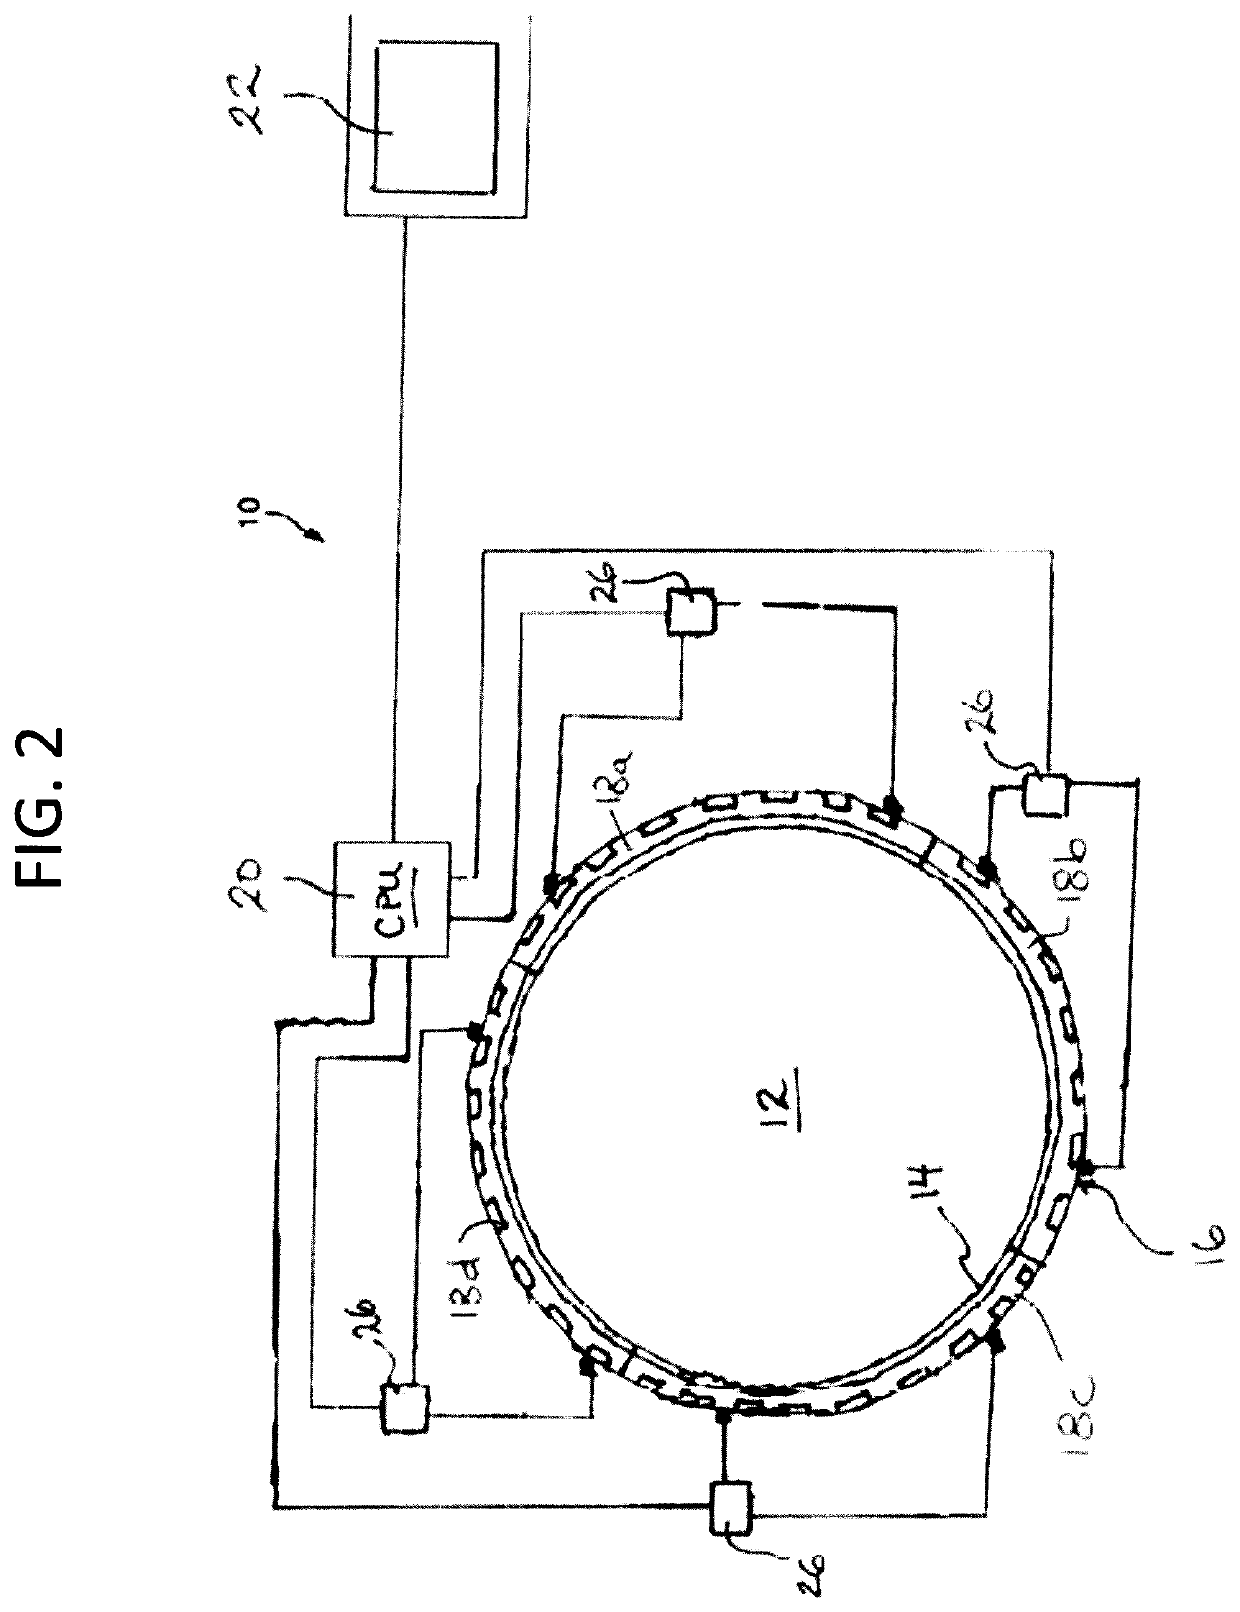 Method and apparatus for acoustically detecting fluid leaks